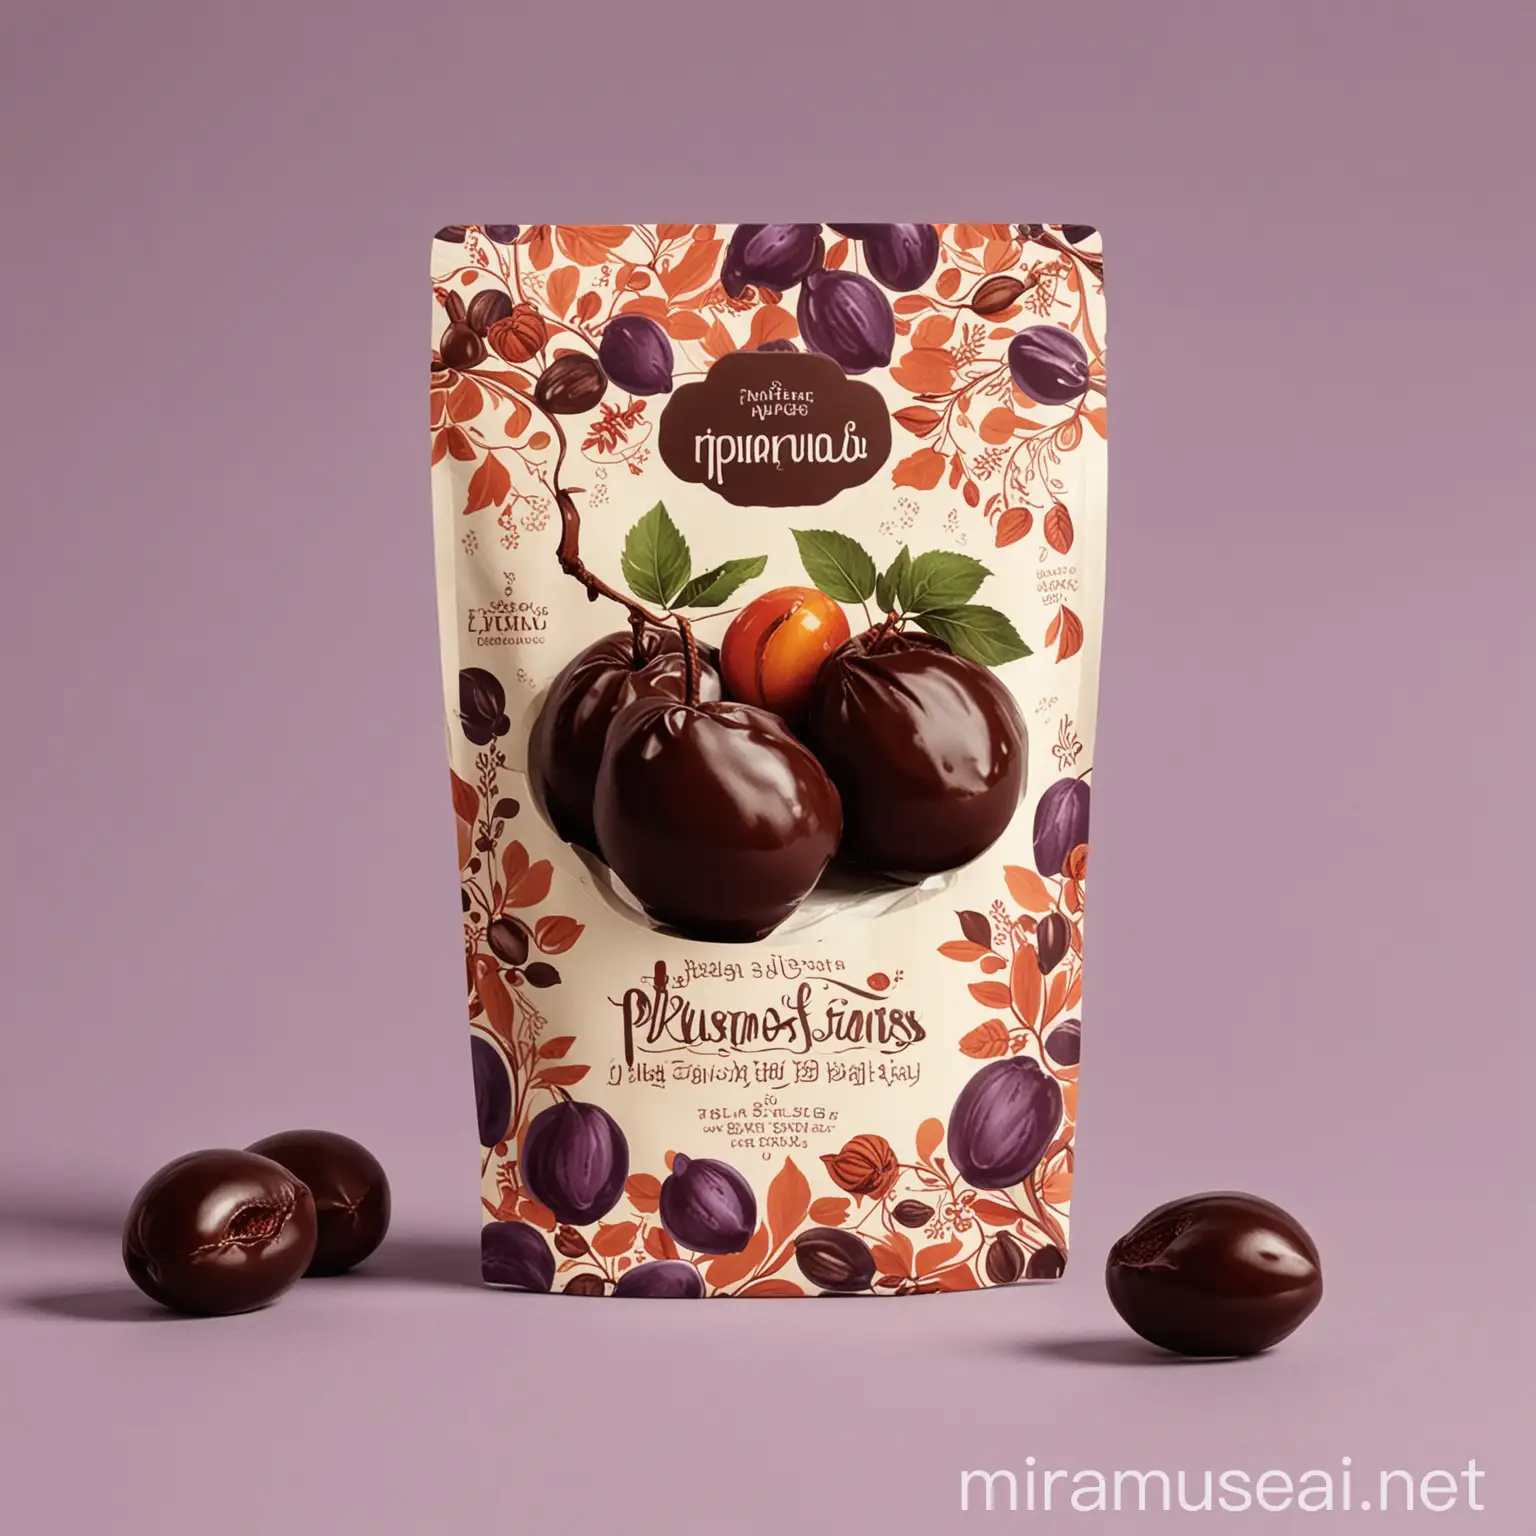 Sensory Delight ChocolateCovered Plums Packaging Illustration